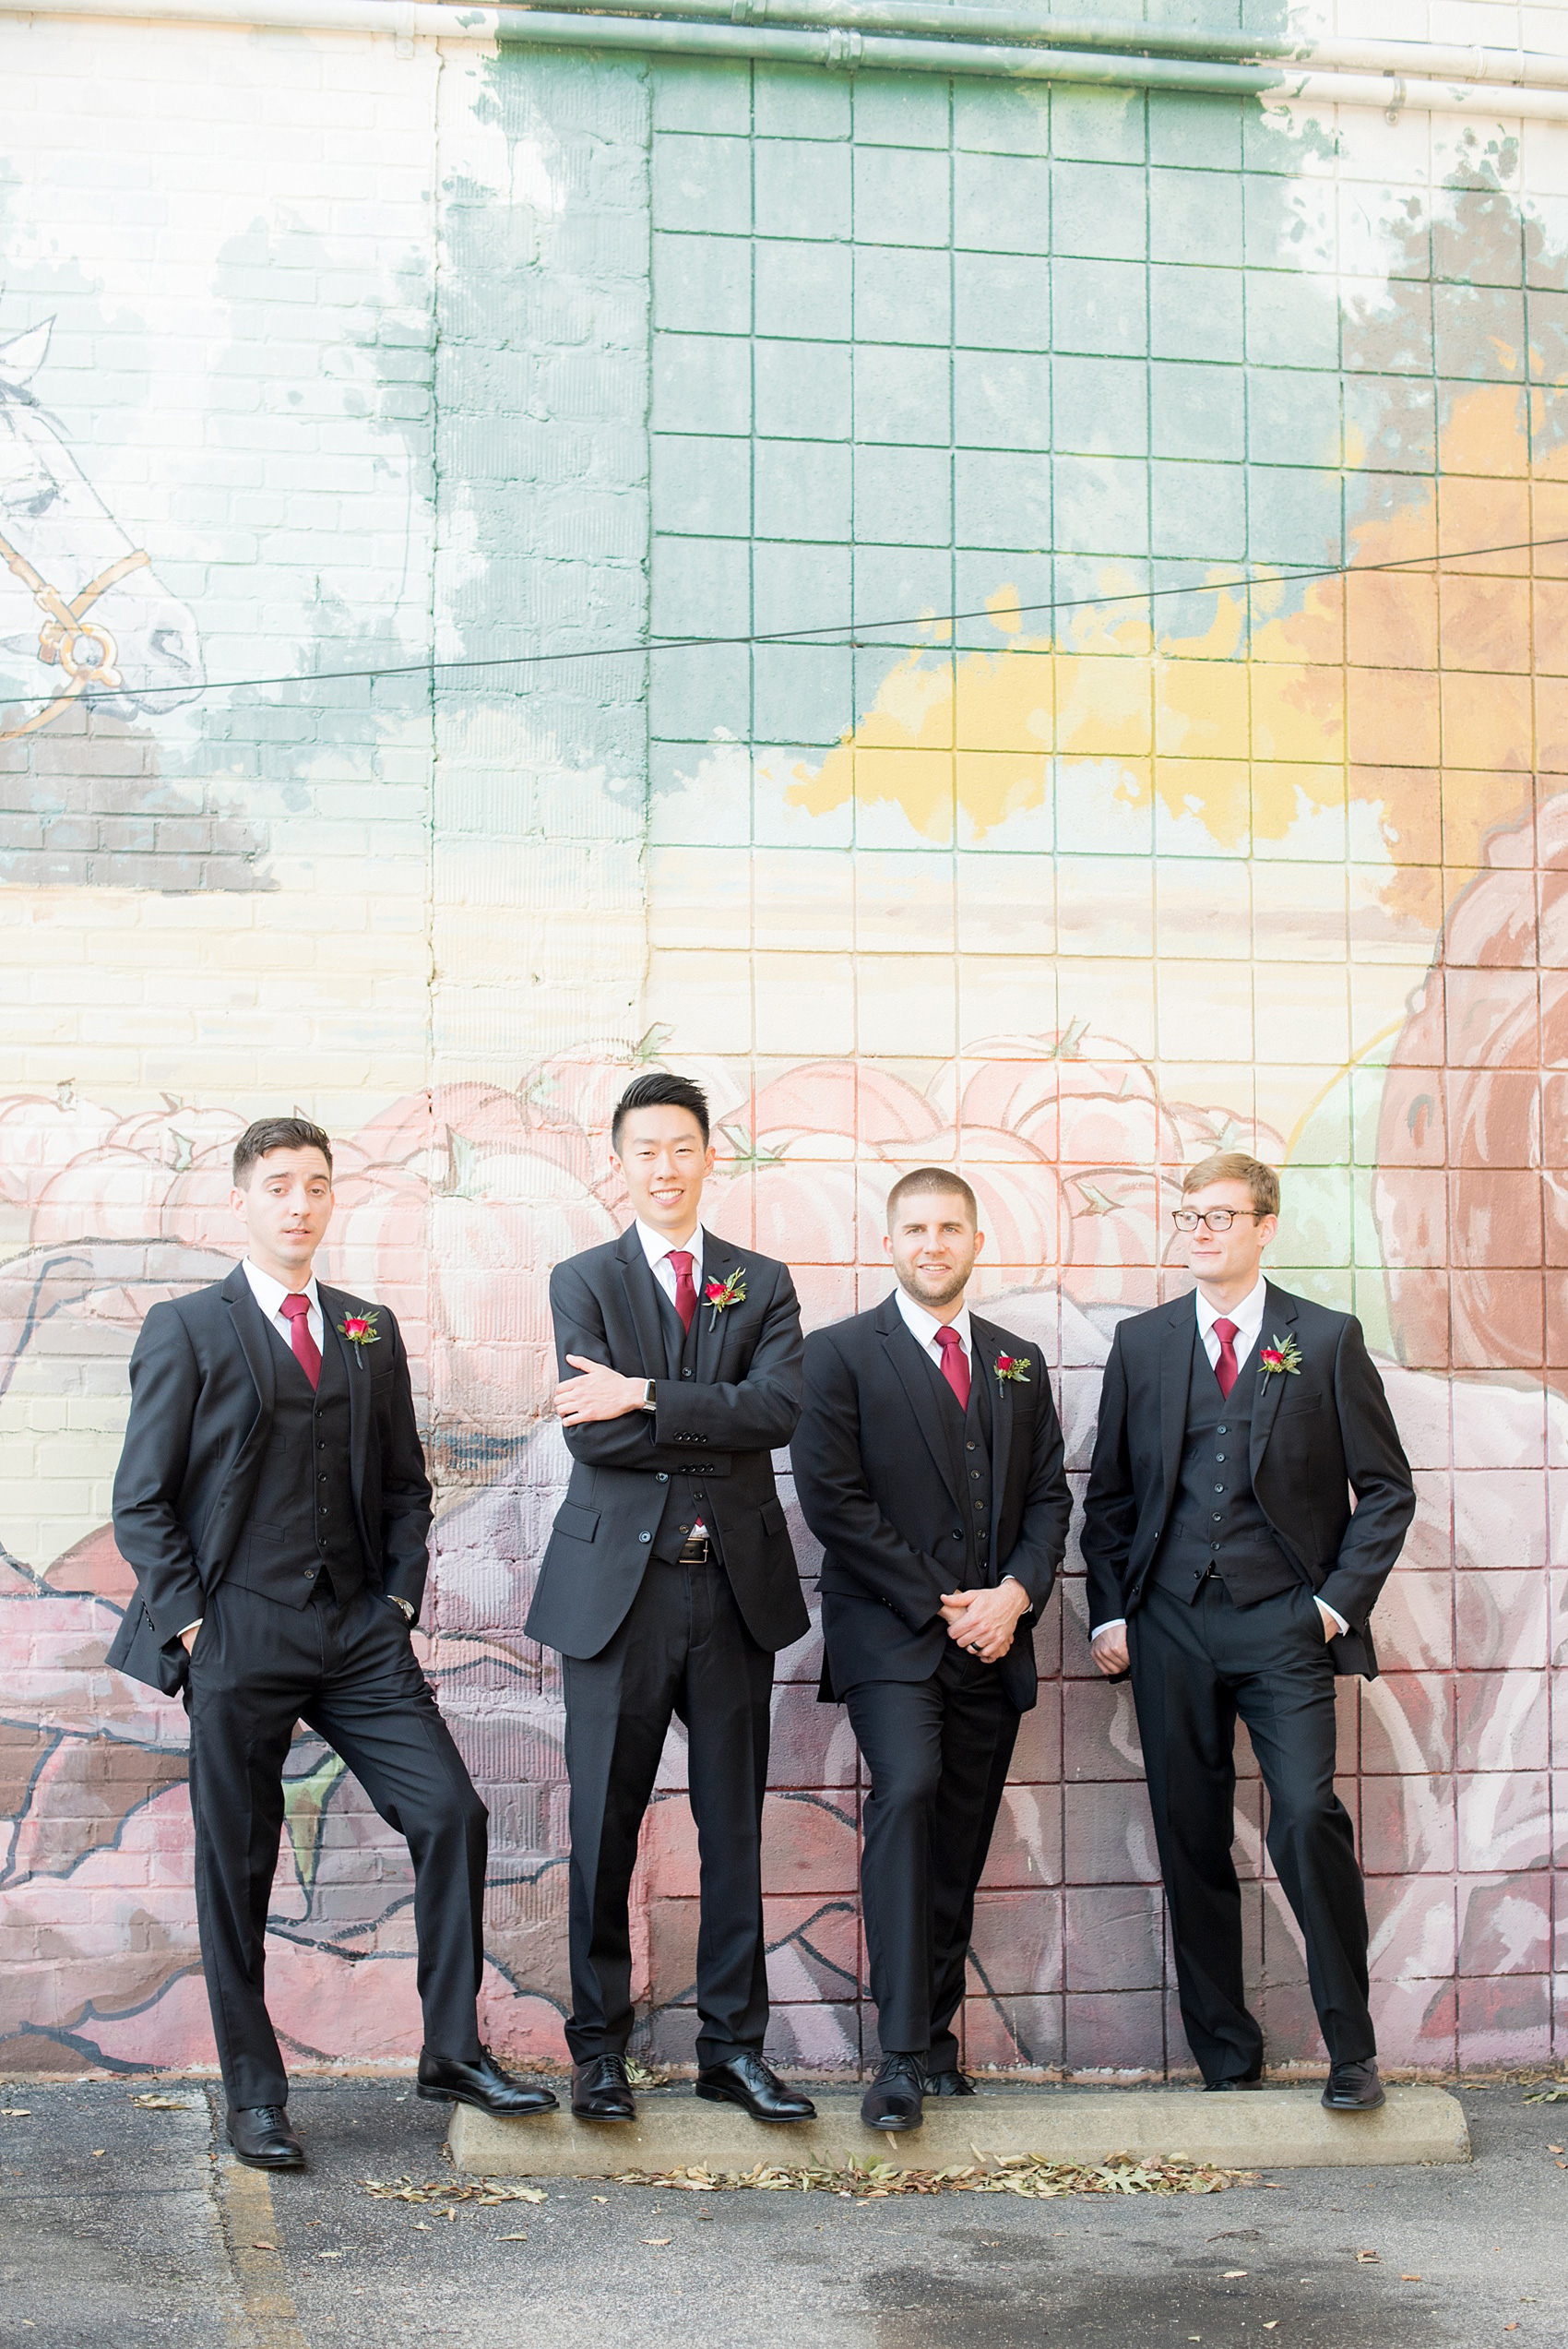 Mikkel Paige Photography photos of groomsmen and a colorful mural in downtown Raleigh for a 214 Martin Street wedding.